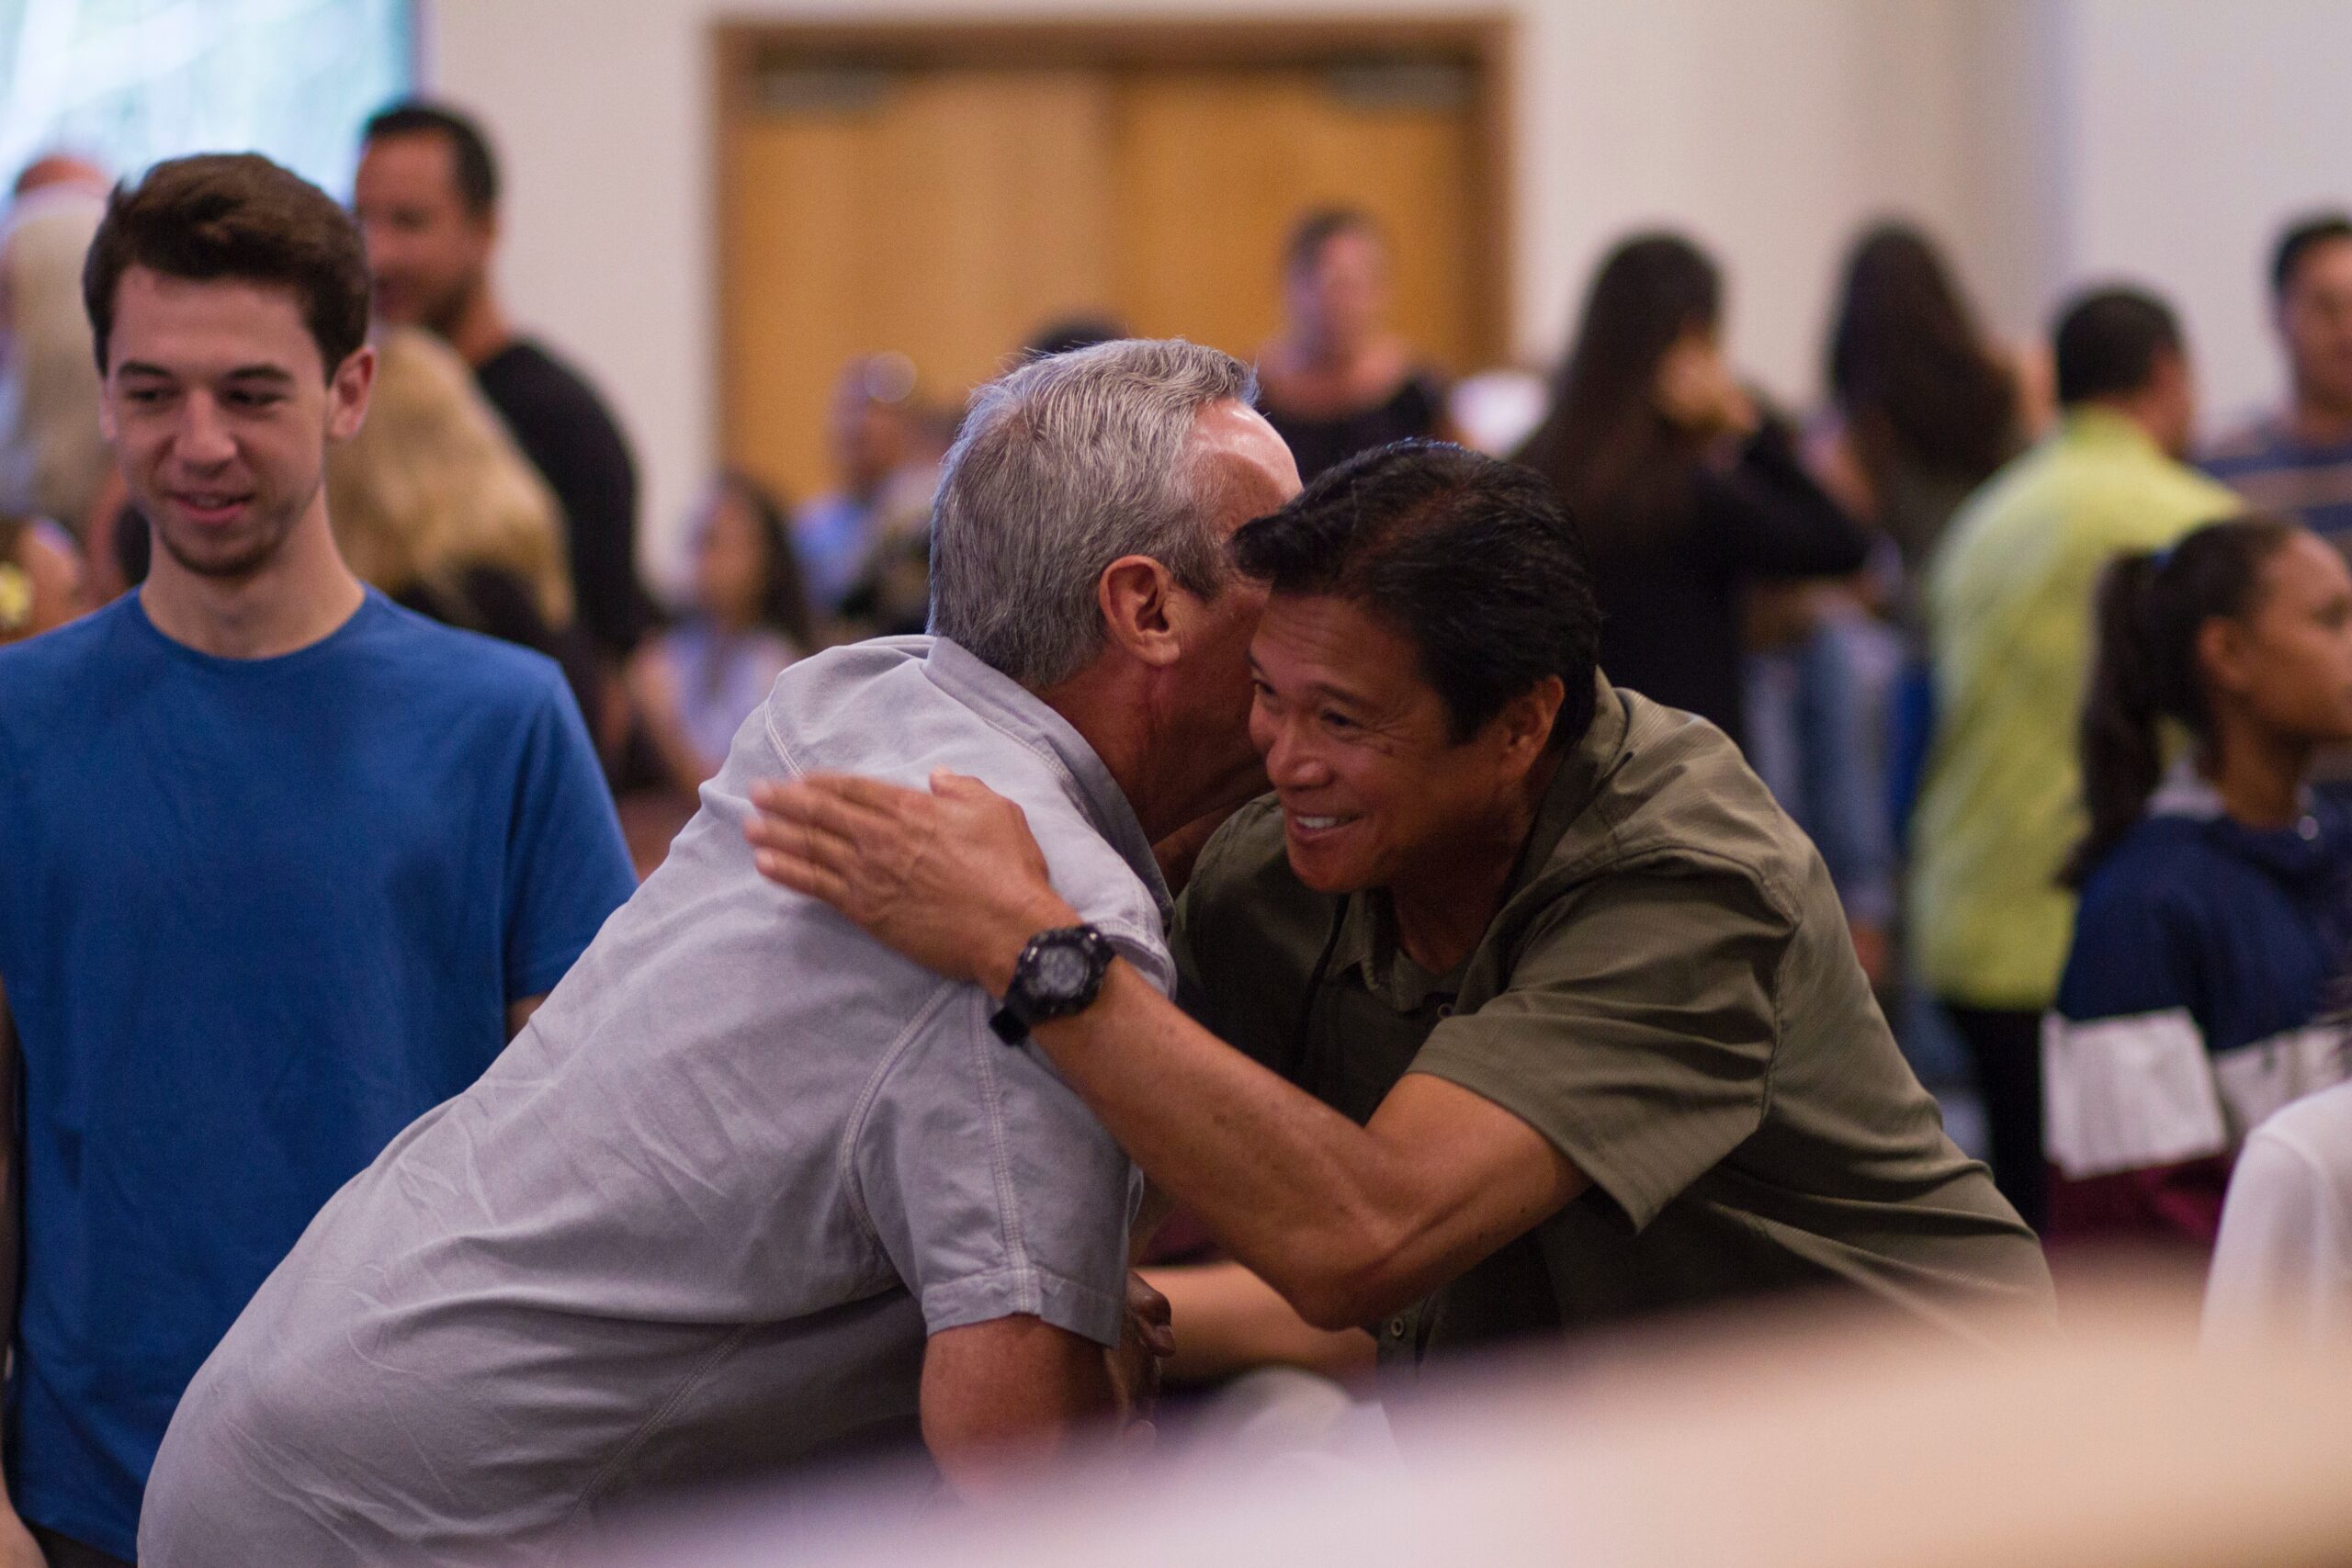 Two men in psychedelic medicine hugging and supporting each other in a mental health care community